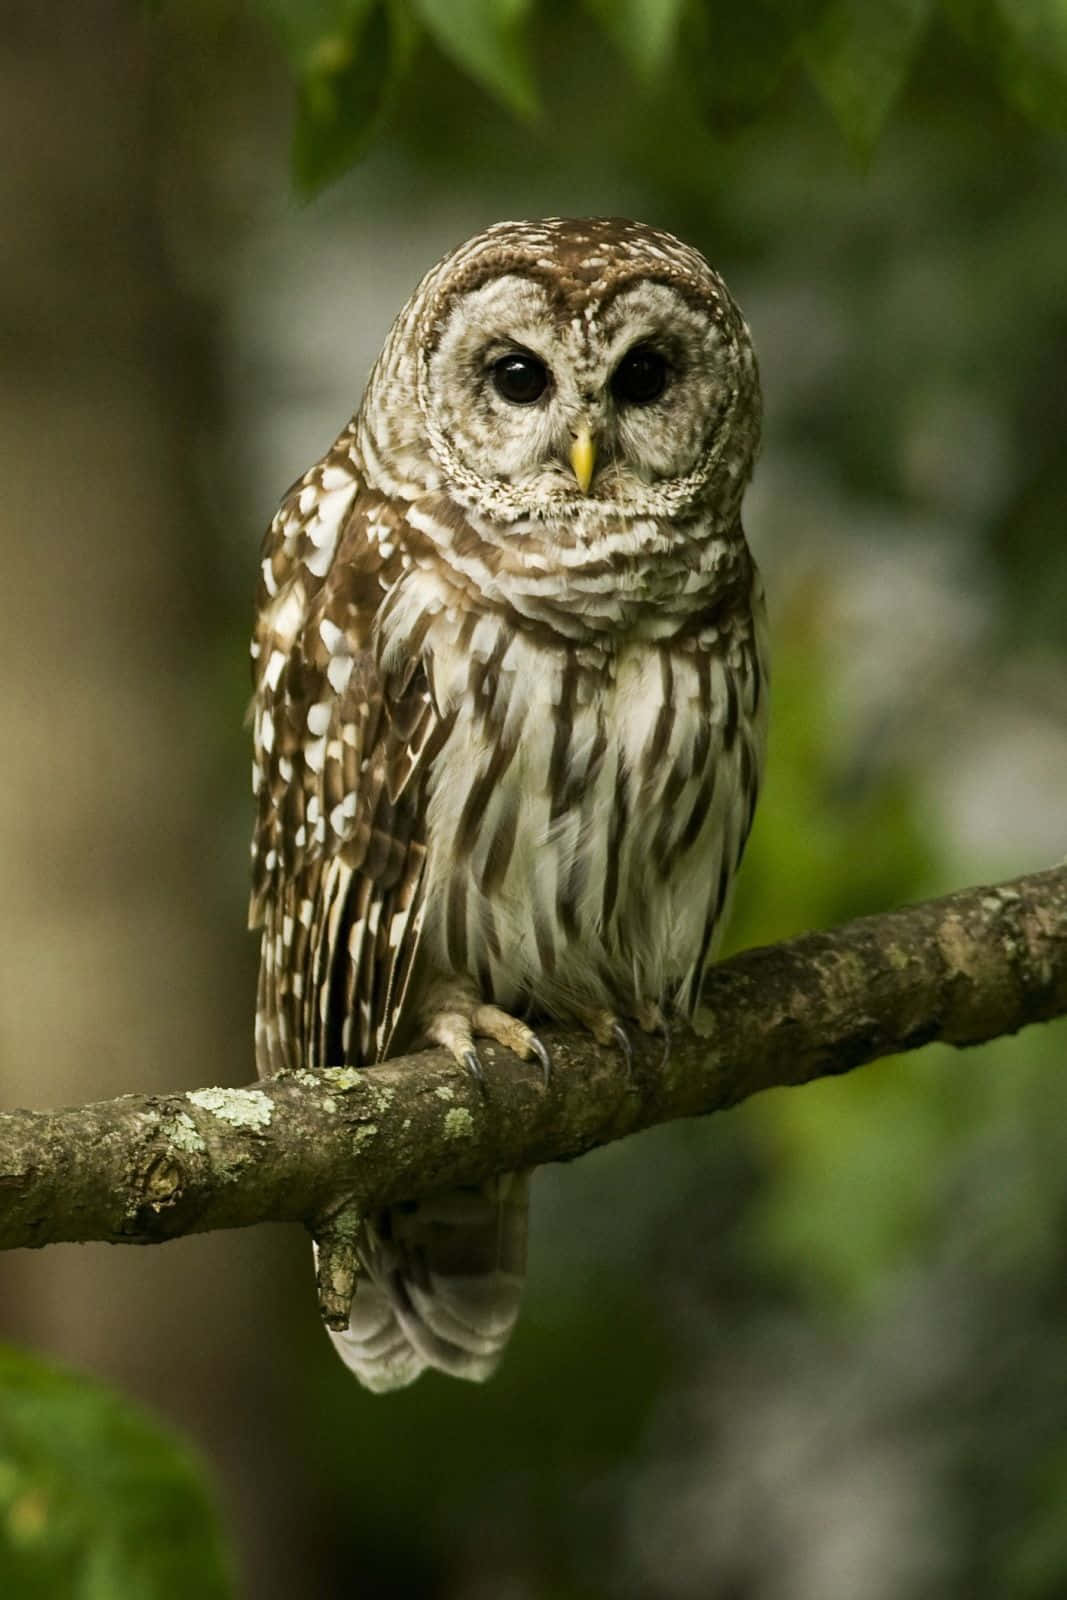 A beautiful wise owl sitting atop a tree branch